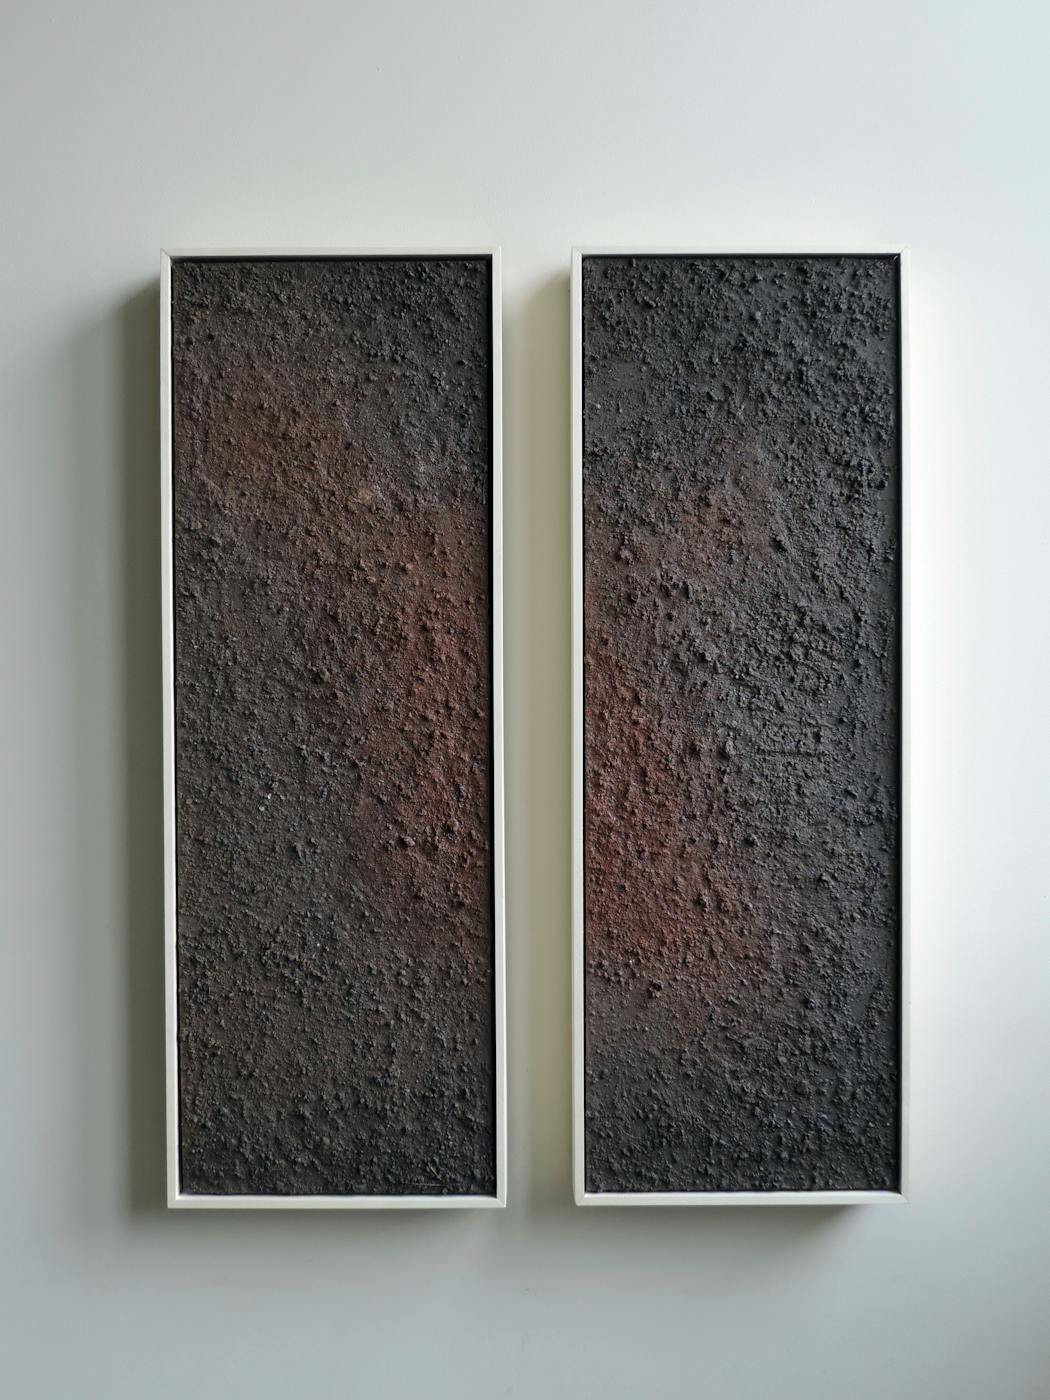 A handout photo provided by the ceramic artist Mitch Iburg shows unfired paintings made using excess sand and stones removed from foraged clays. 